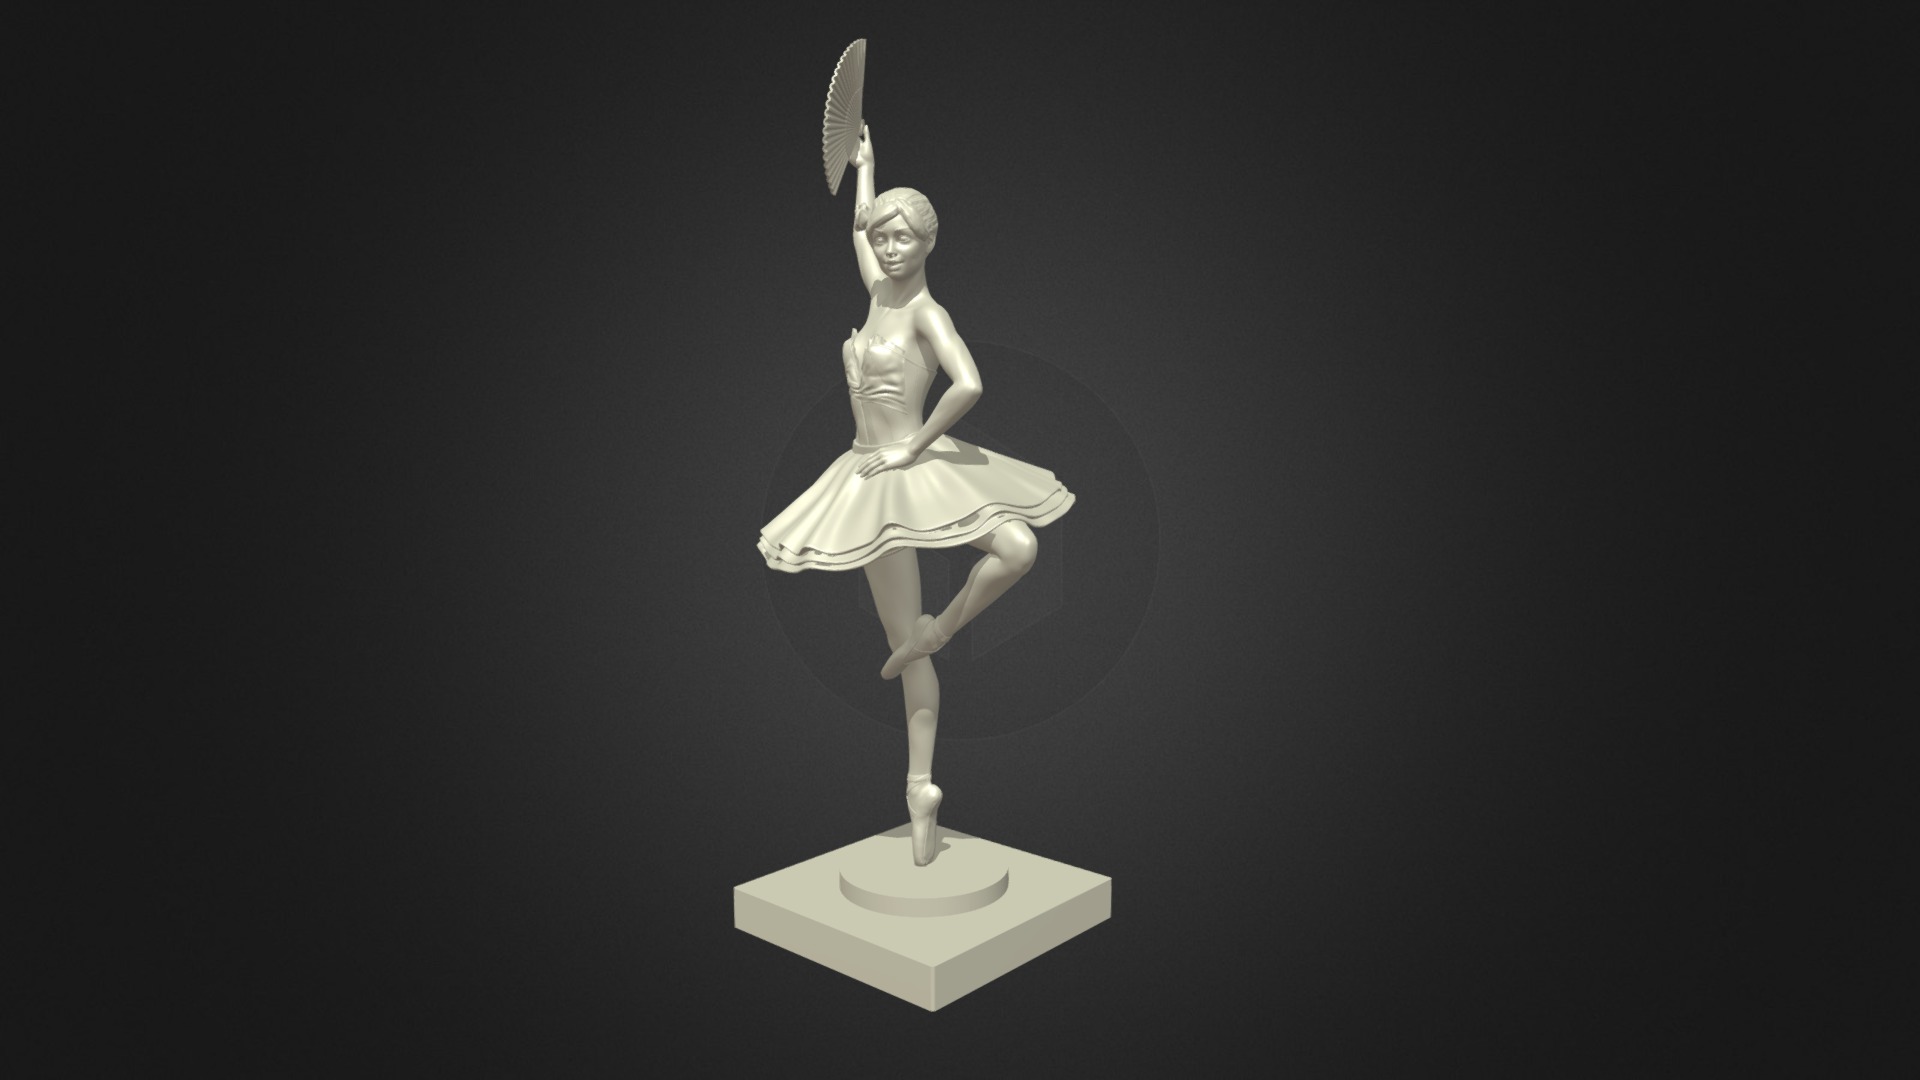 3D model 3D Printable Ballerina 4 - This is a 3D model of the 3D Printable Ballerina 4. The 3D model is about a statue of a person holding a sword.